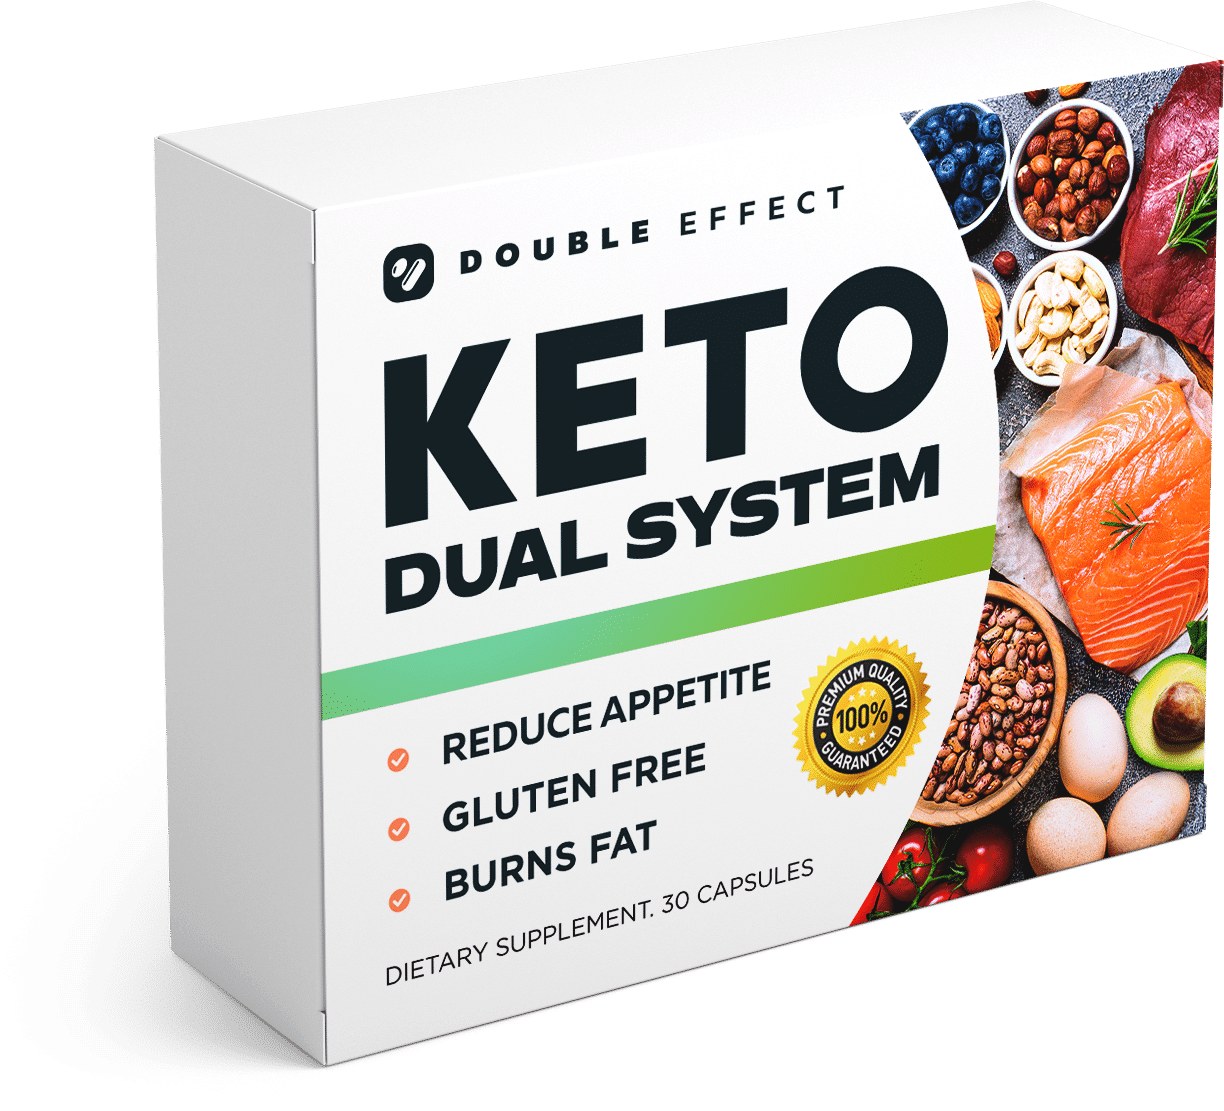 Keto Dual System Product Overview. What Is It?